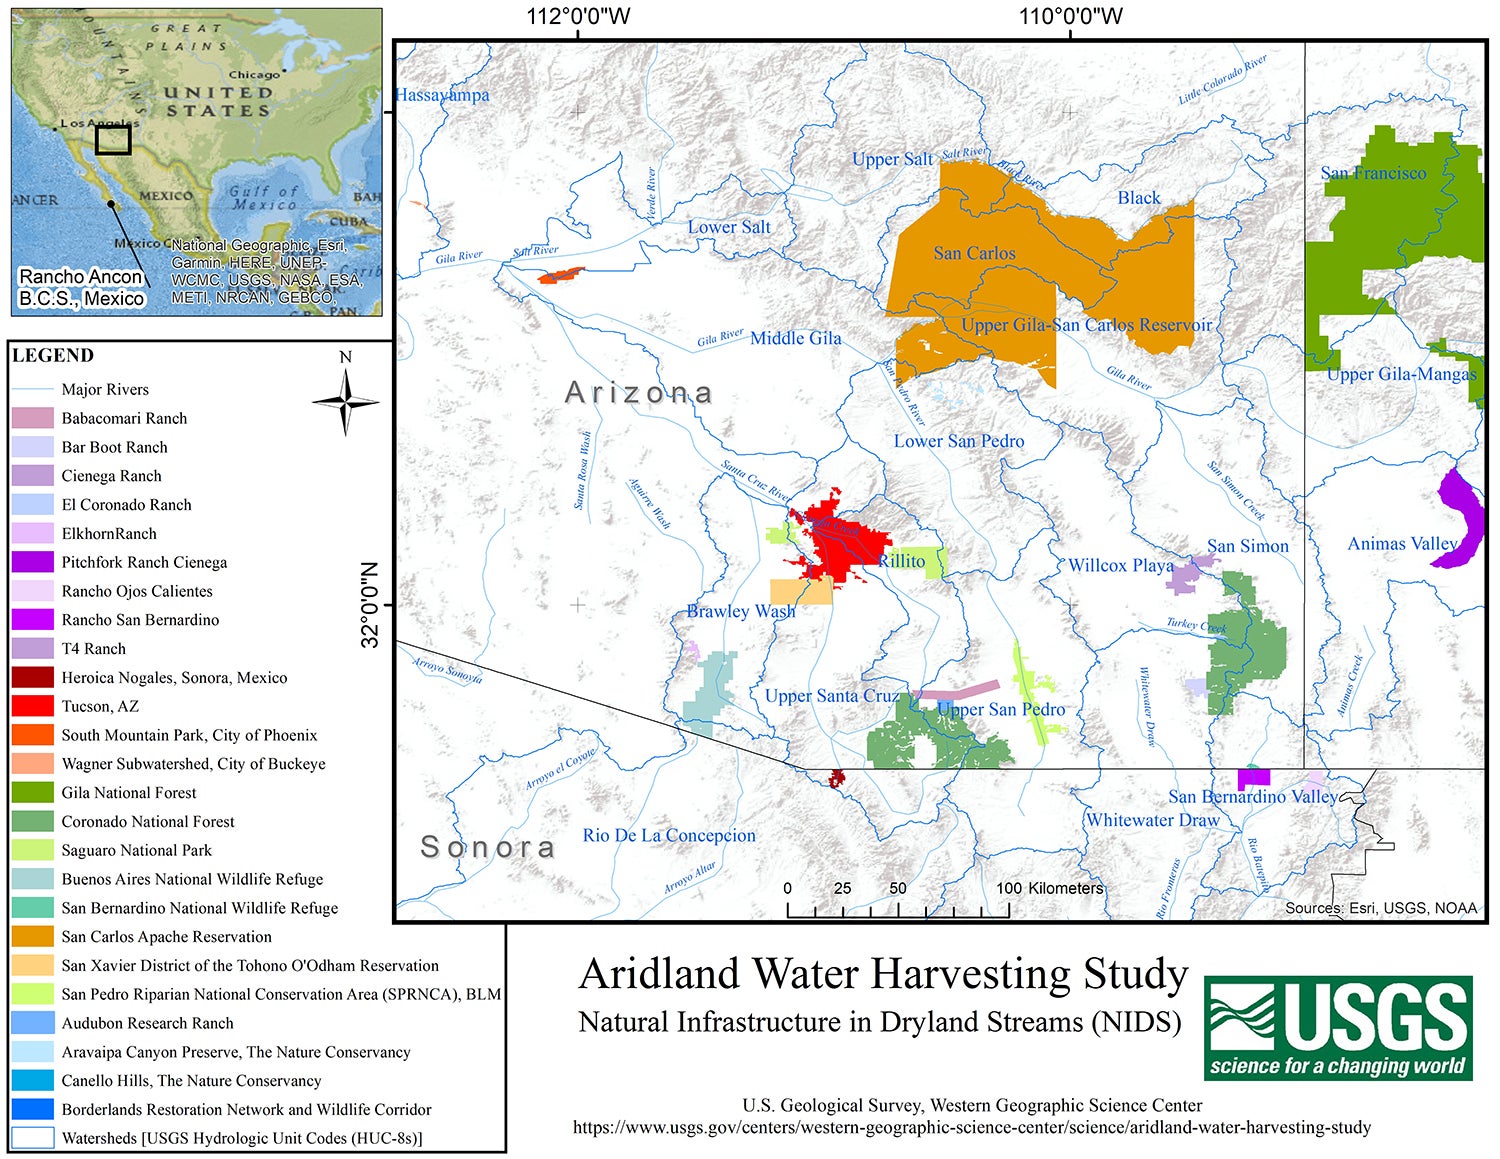 USGS map of Arizona, New Mexico, and Mexico showing areas studied during Aridland Water Harvesting Study